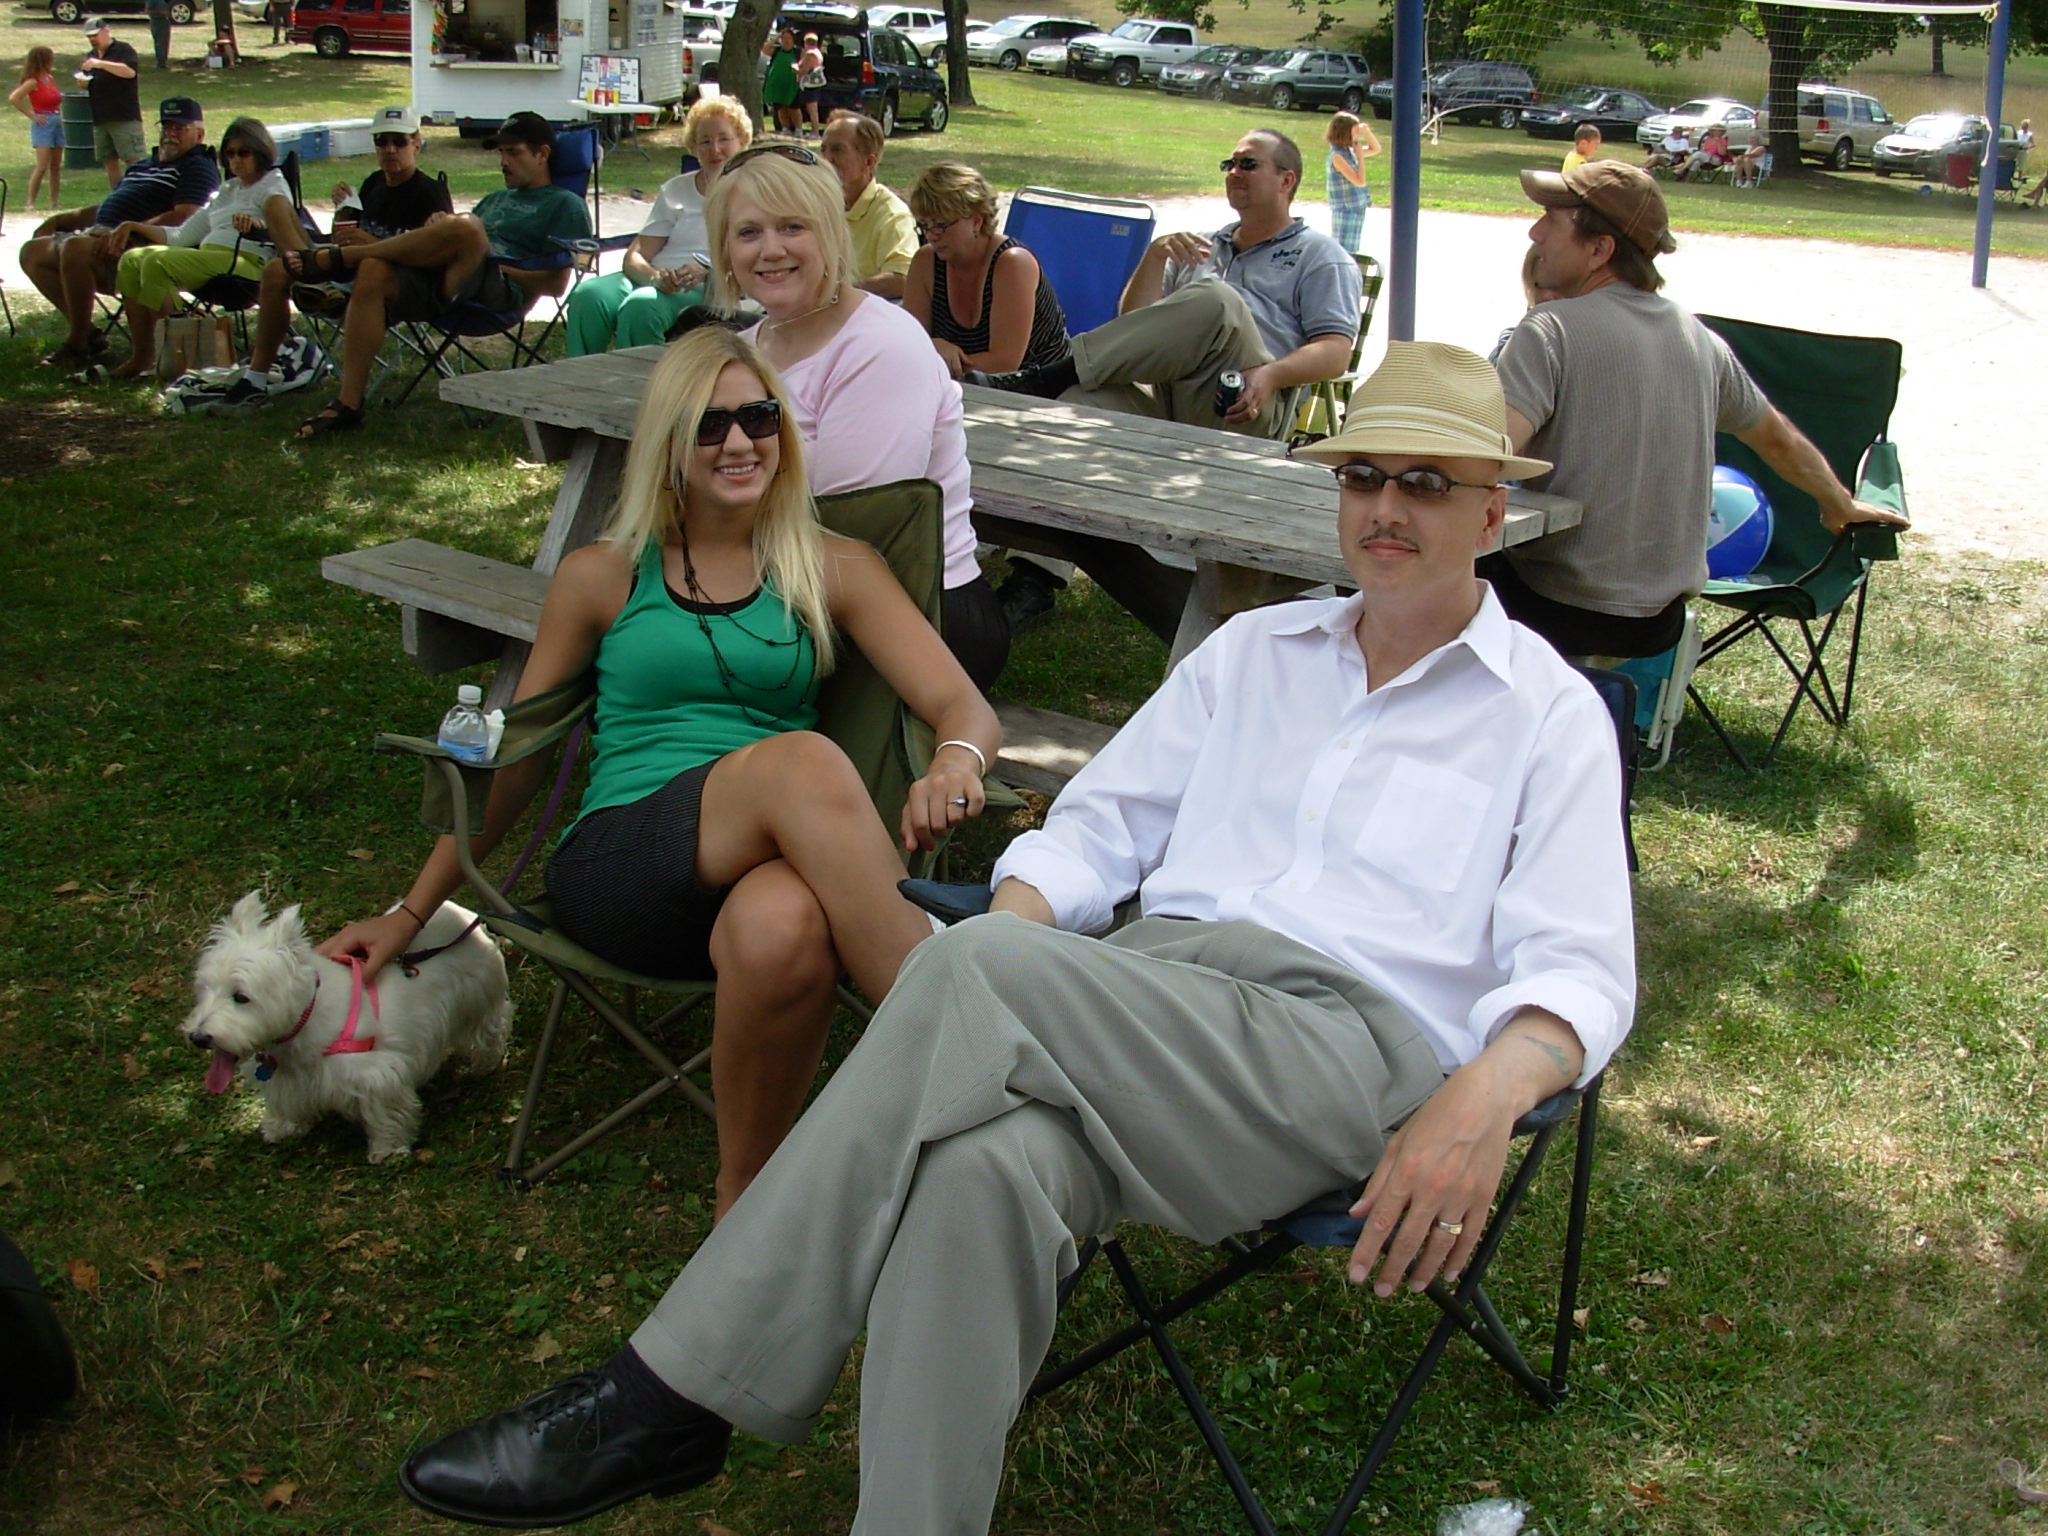 The Graeff family enjoying a Sunday afternoon after a performance
Cassie the dog was in attendance for the show....
